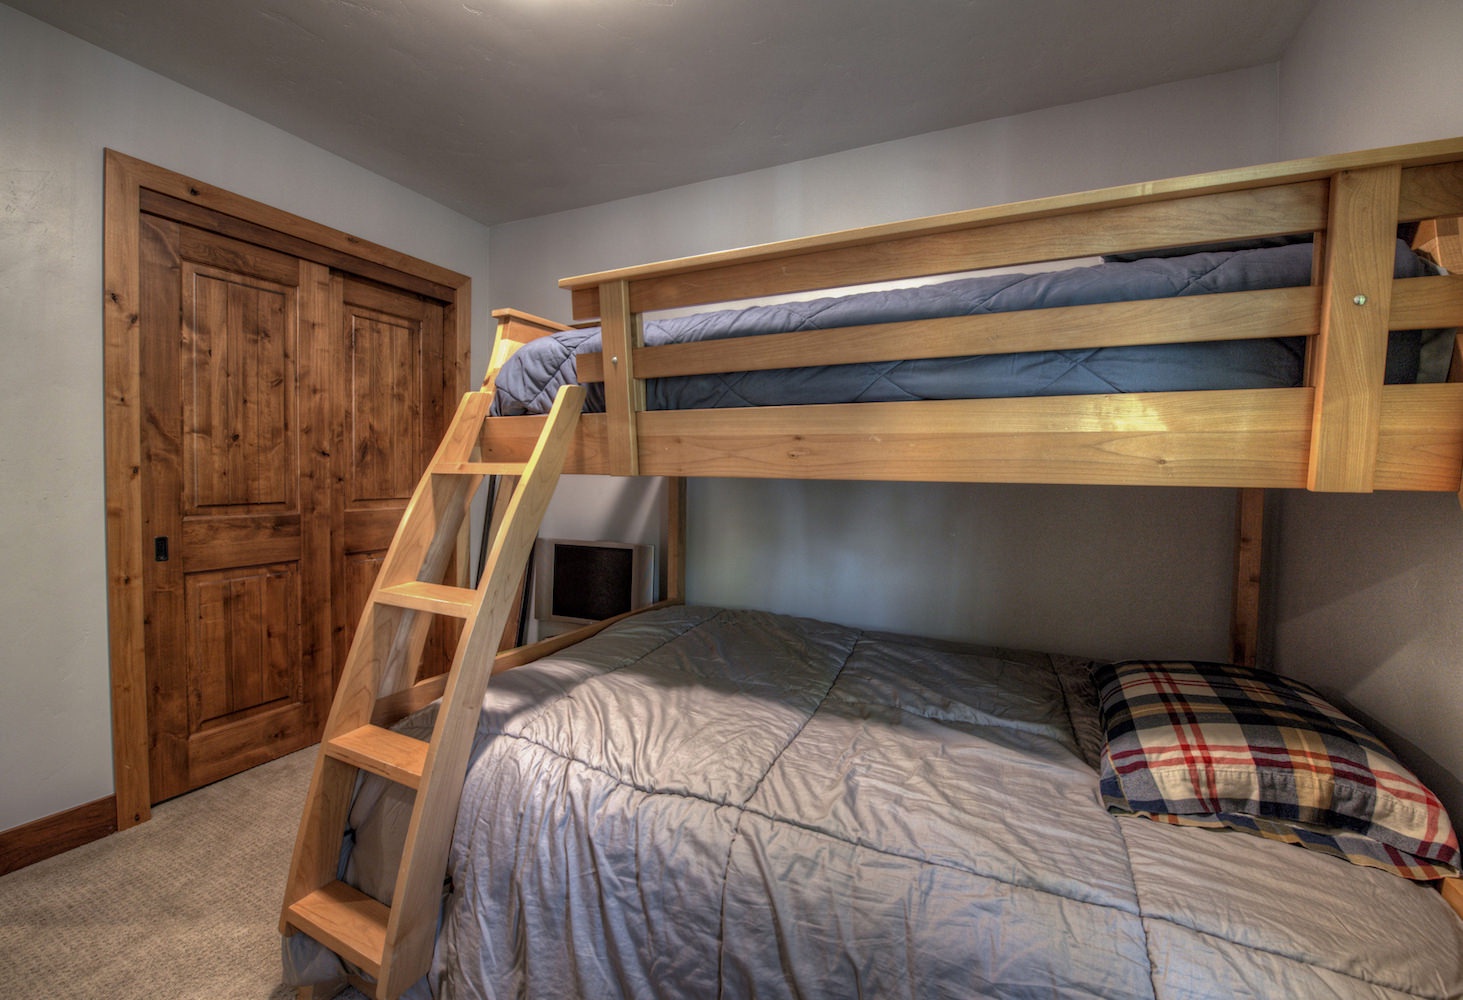 3rd bedroom: Twin/Full bunkbed, great for kids